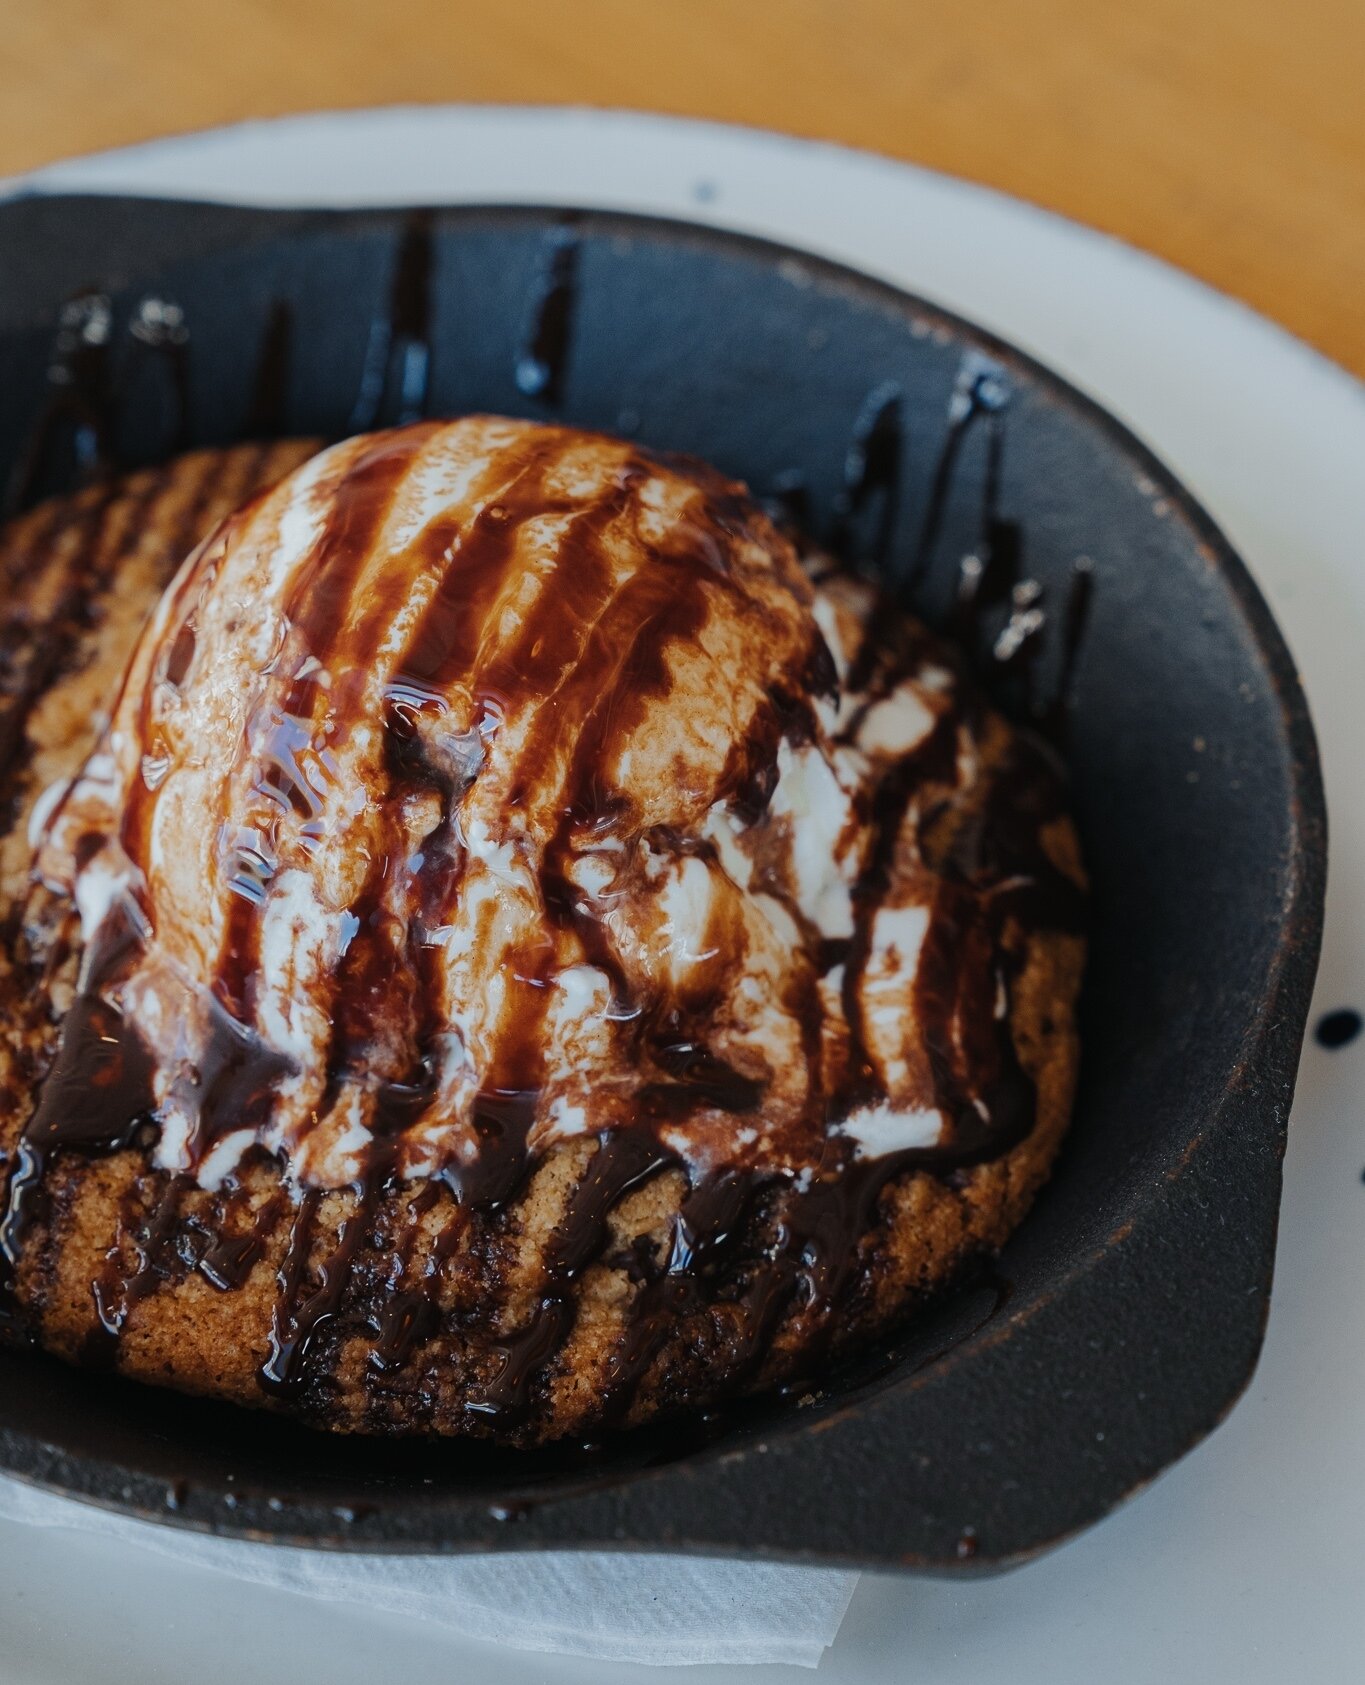 Trust us, you need it. 😋⁠
⁠
LAKE HOUSE SKILLET COOKIE~ vanilla ice cream, chocolate chip⁠
cookie + chocolate sauce. ⁠
.⁠
.⁠
.⁠
.⁠
.⁠
#lindeyslakehouse #flatseastbank #instafood #restaurant #delicious #foodporn #lunch #dinner #yummy #foodphotography 